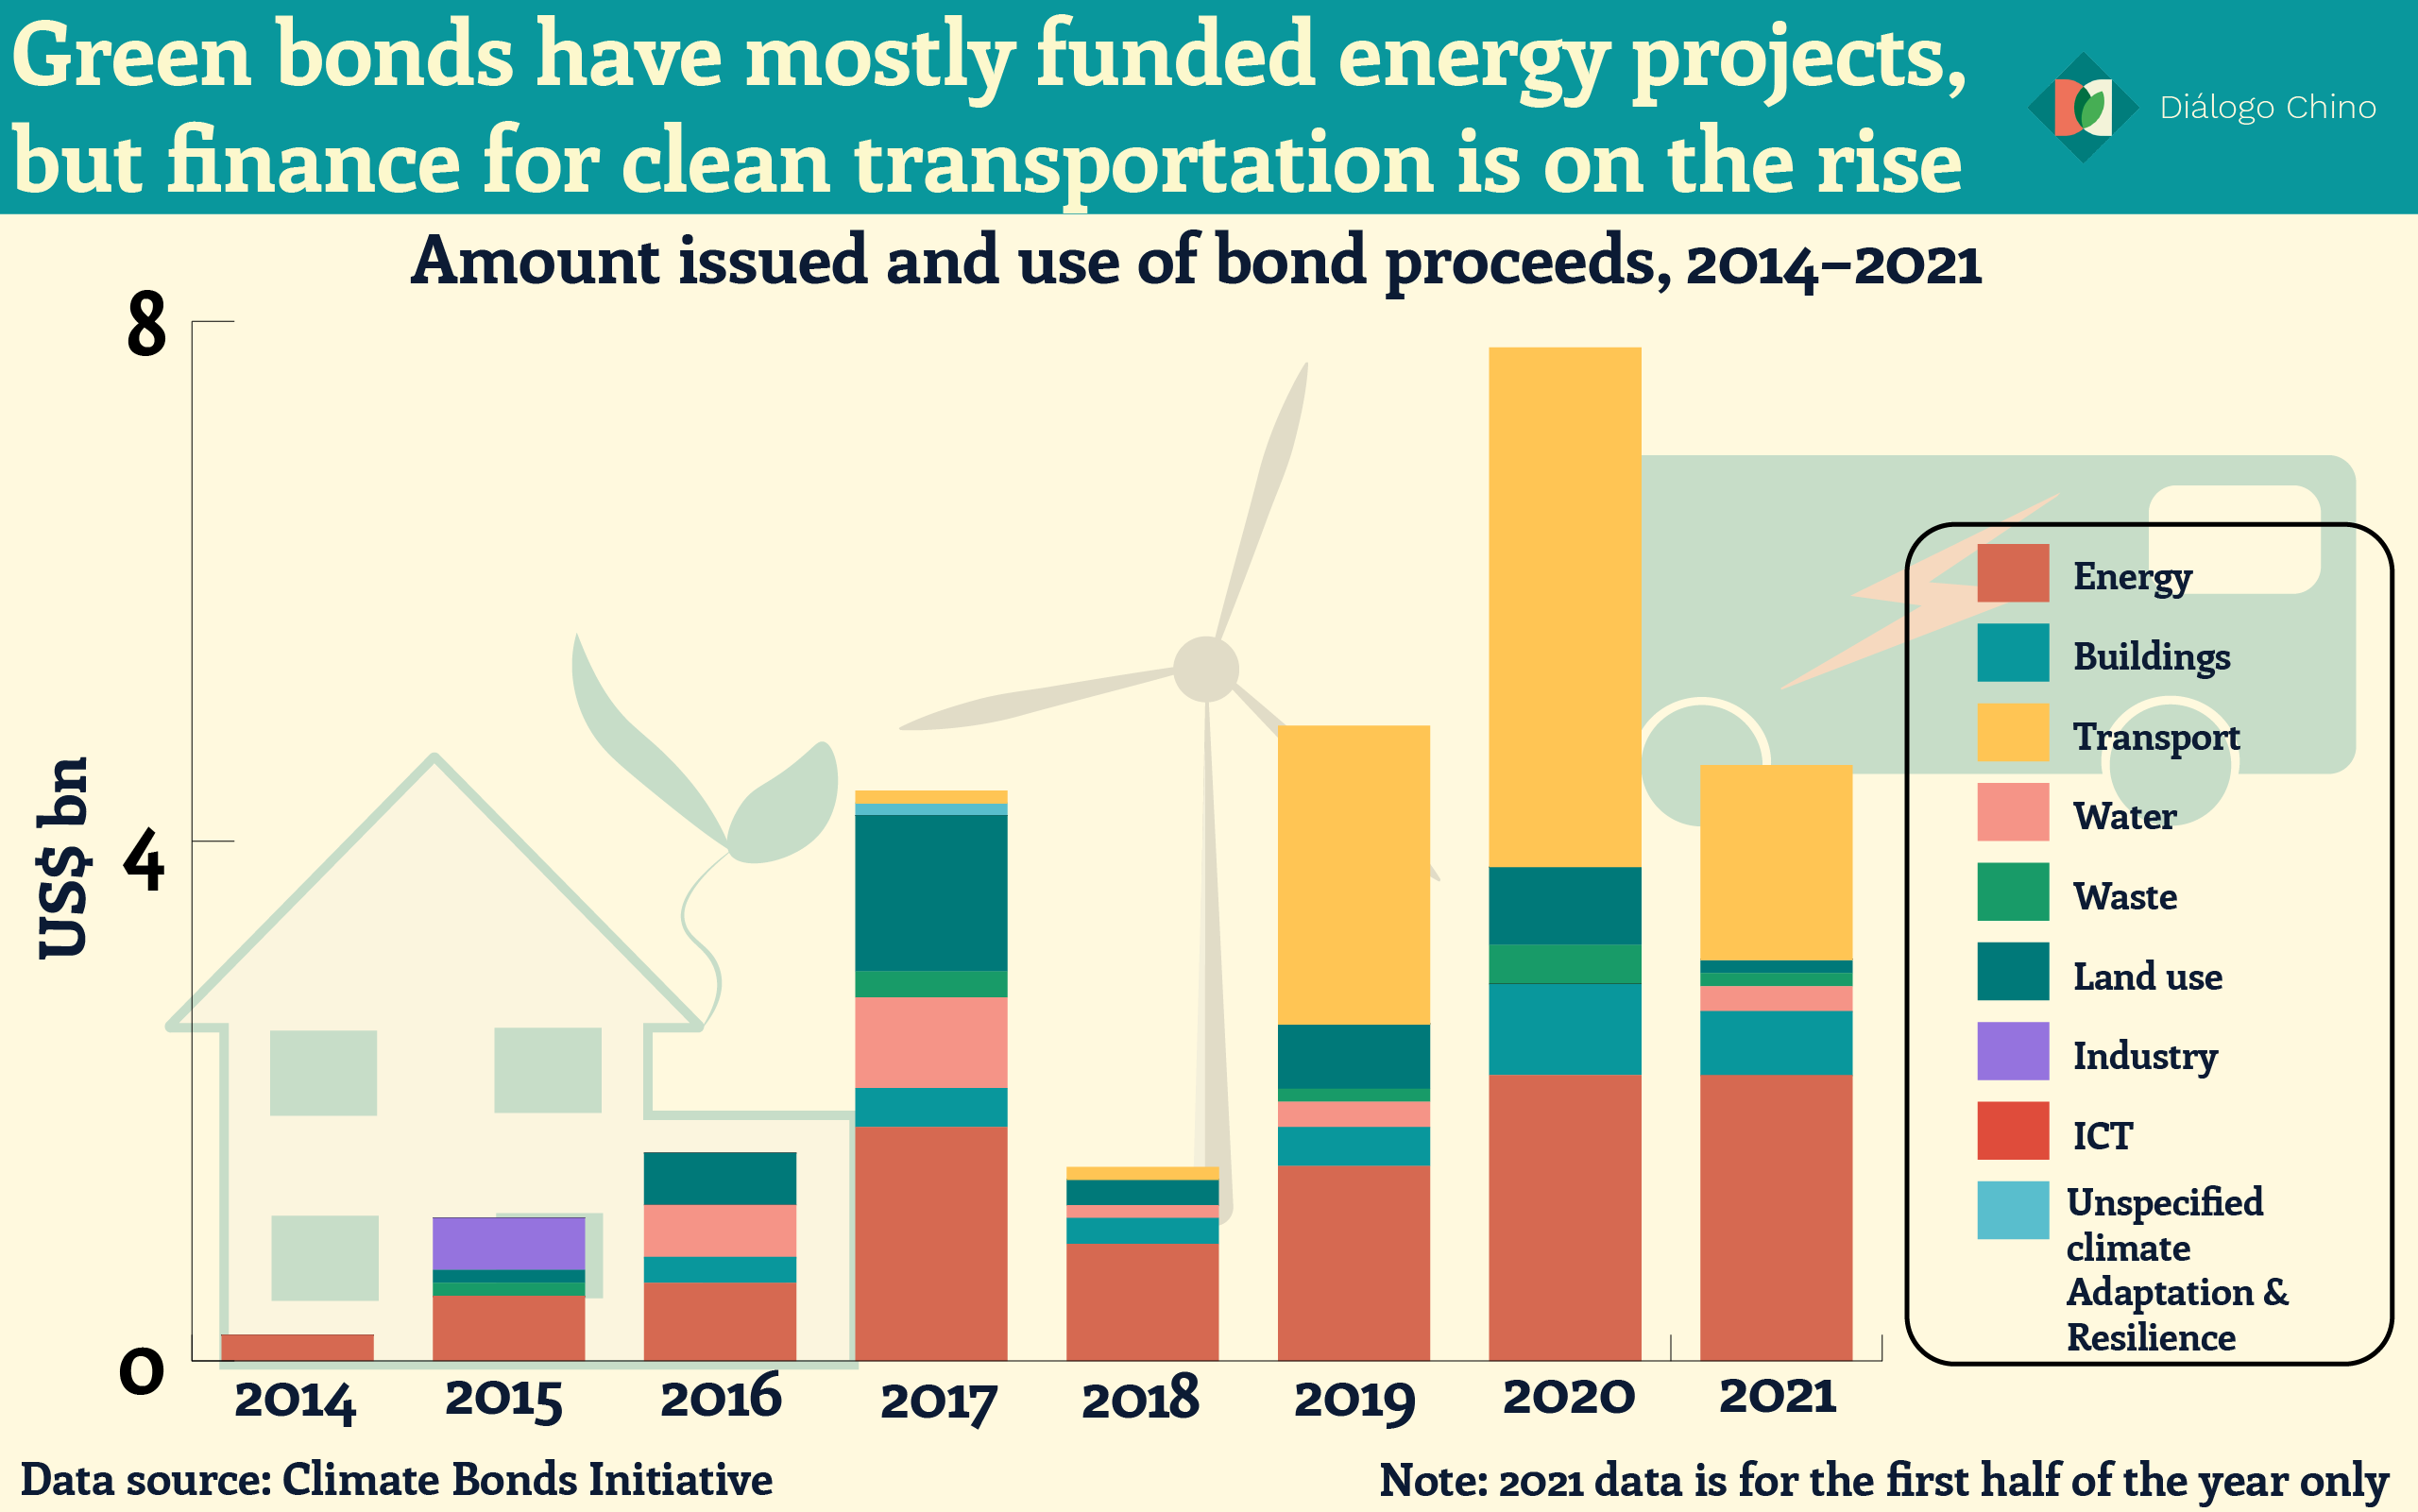 Bar chart showing the amount of bond issuance and use of bond proceeds between 2014 and 2021